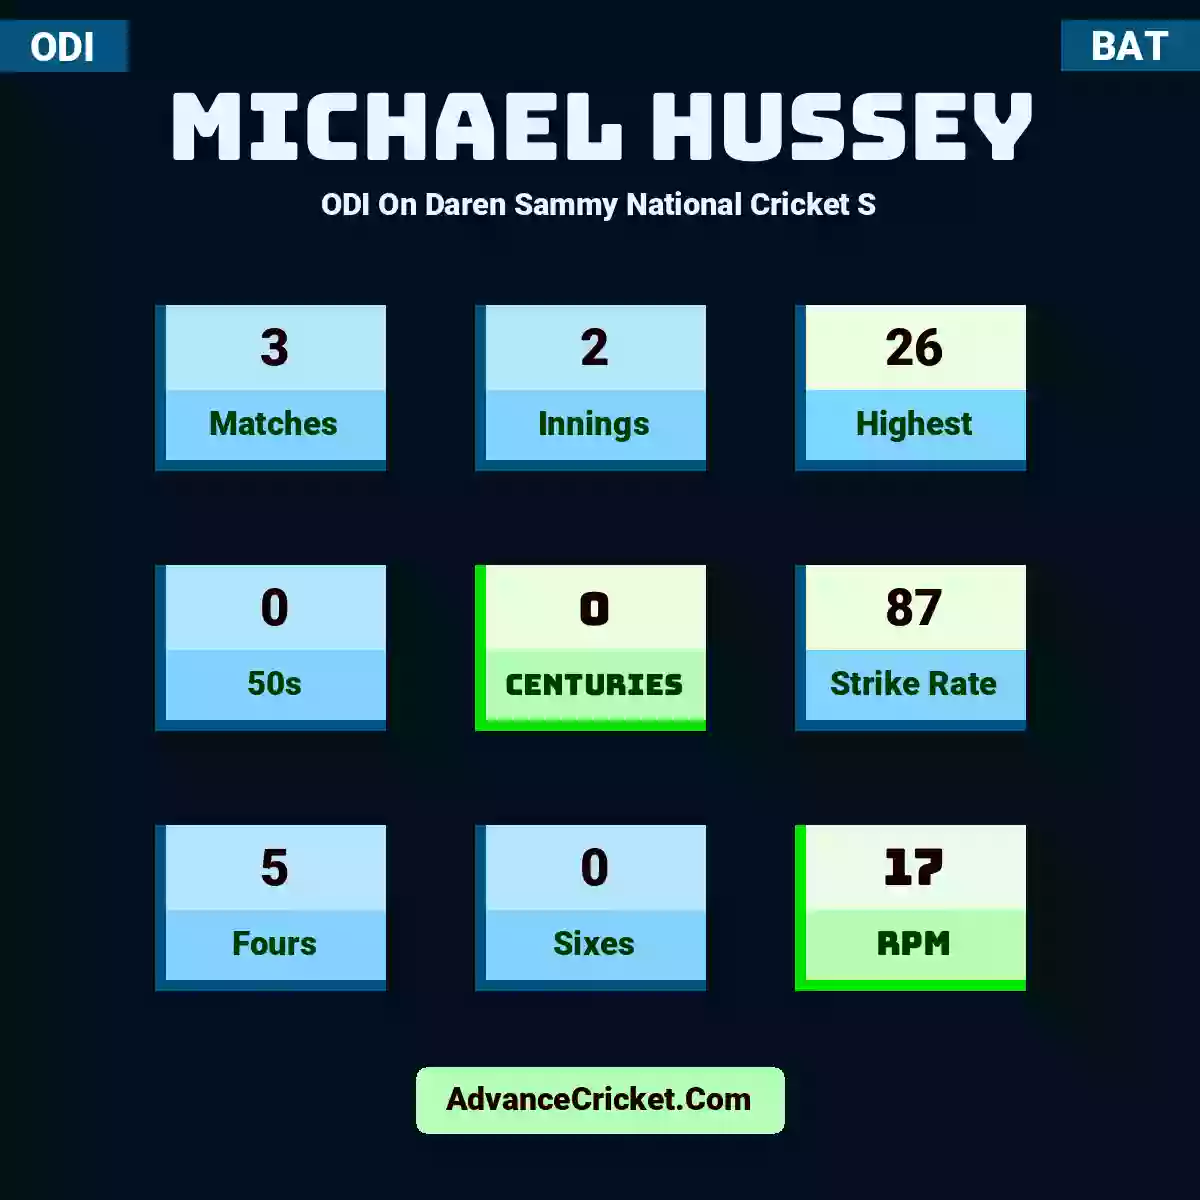 Michael Hussey ODI  On Daren Sammy National Cricket S, Michael Hussey played 3 matches, scored 26 runs as highest, 0 half-centuries, and 0 centuries, with a strike rate of 87. M.Hussey hit 5 fours and 0 sixes, with an RPM of 17.